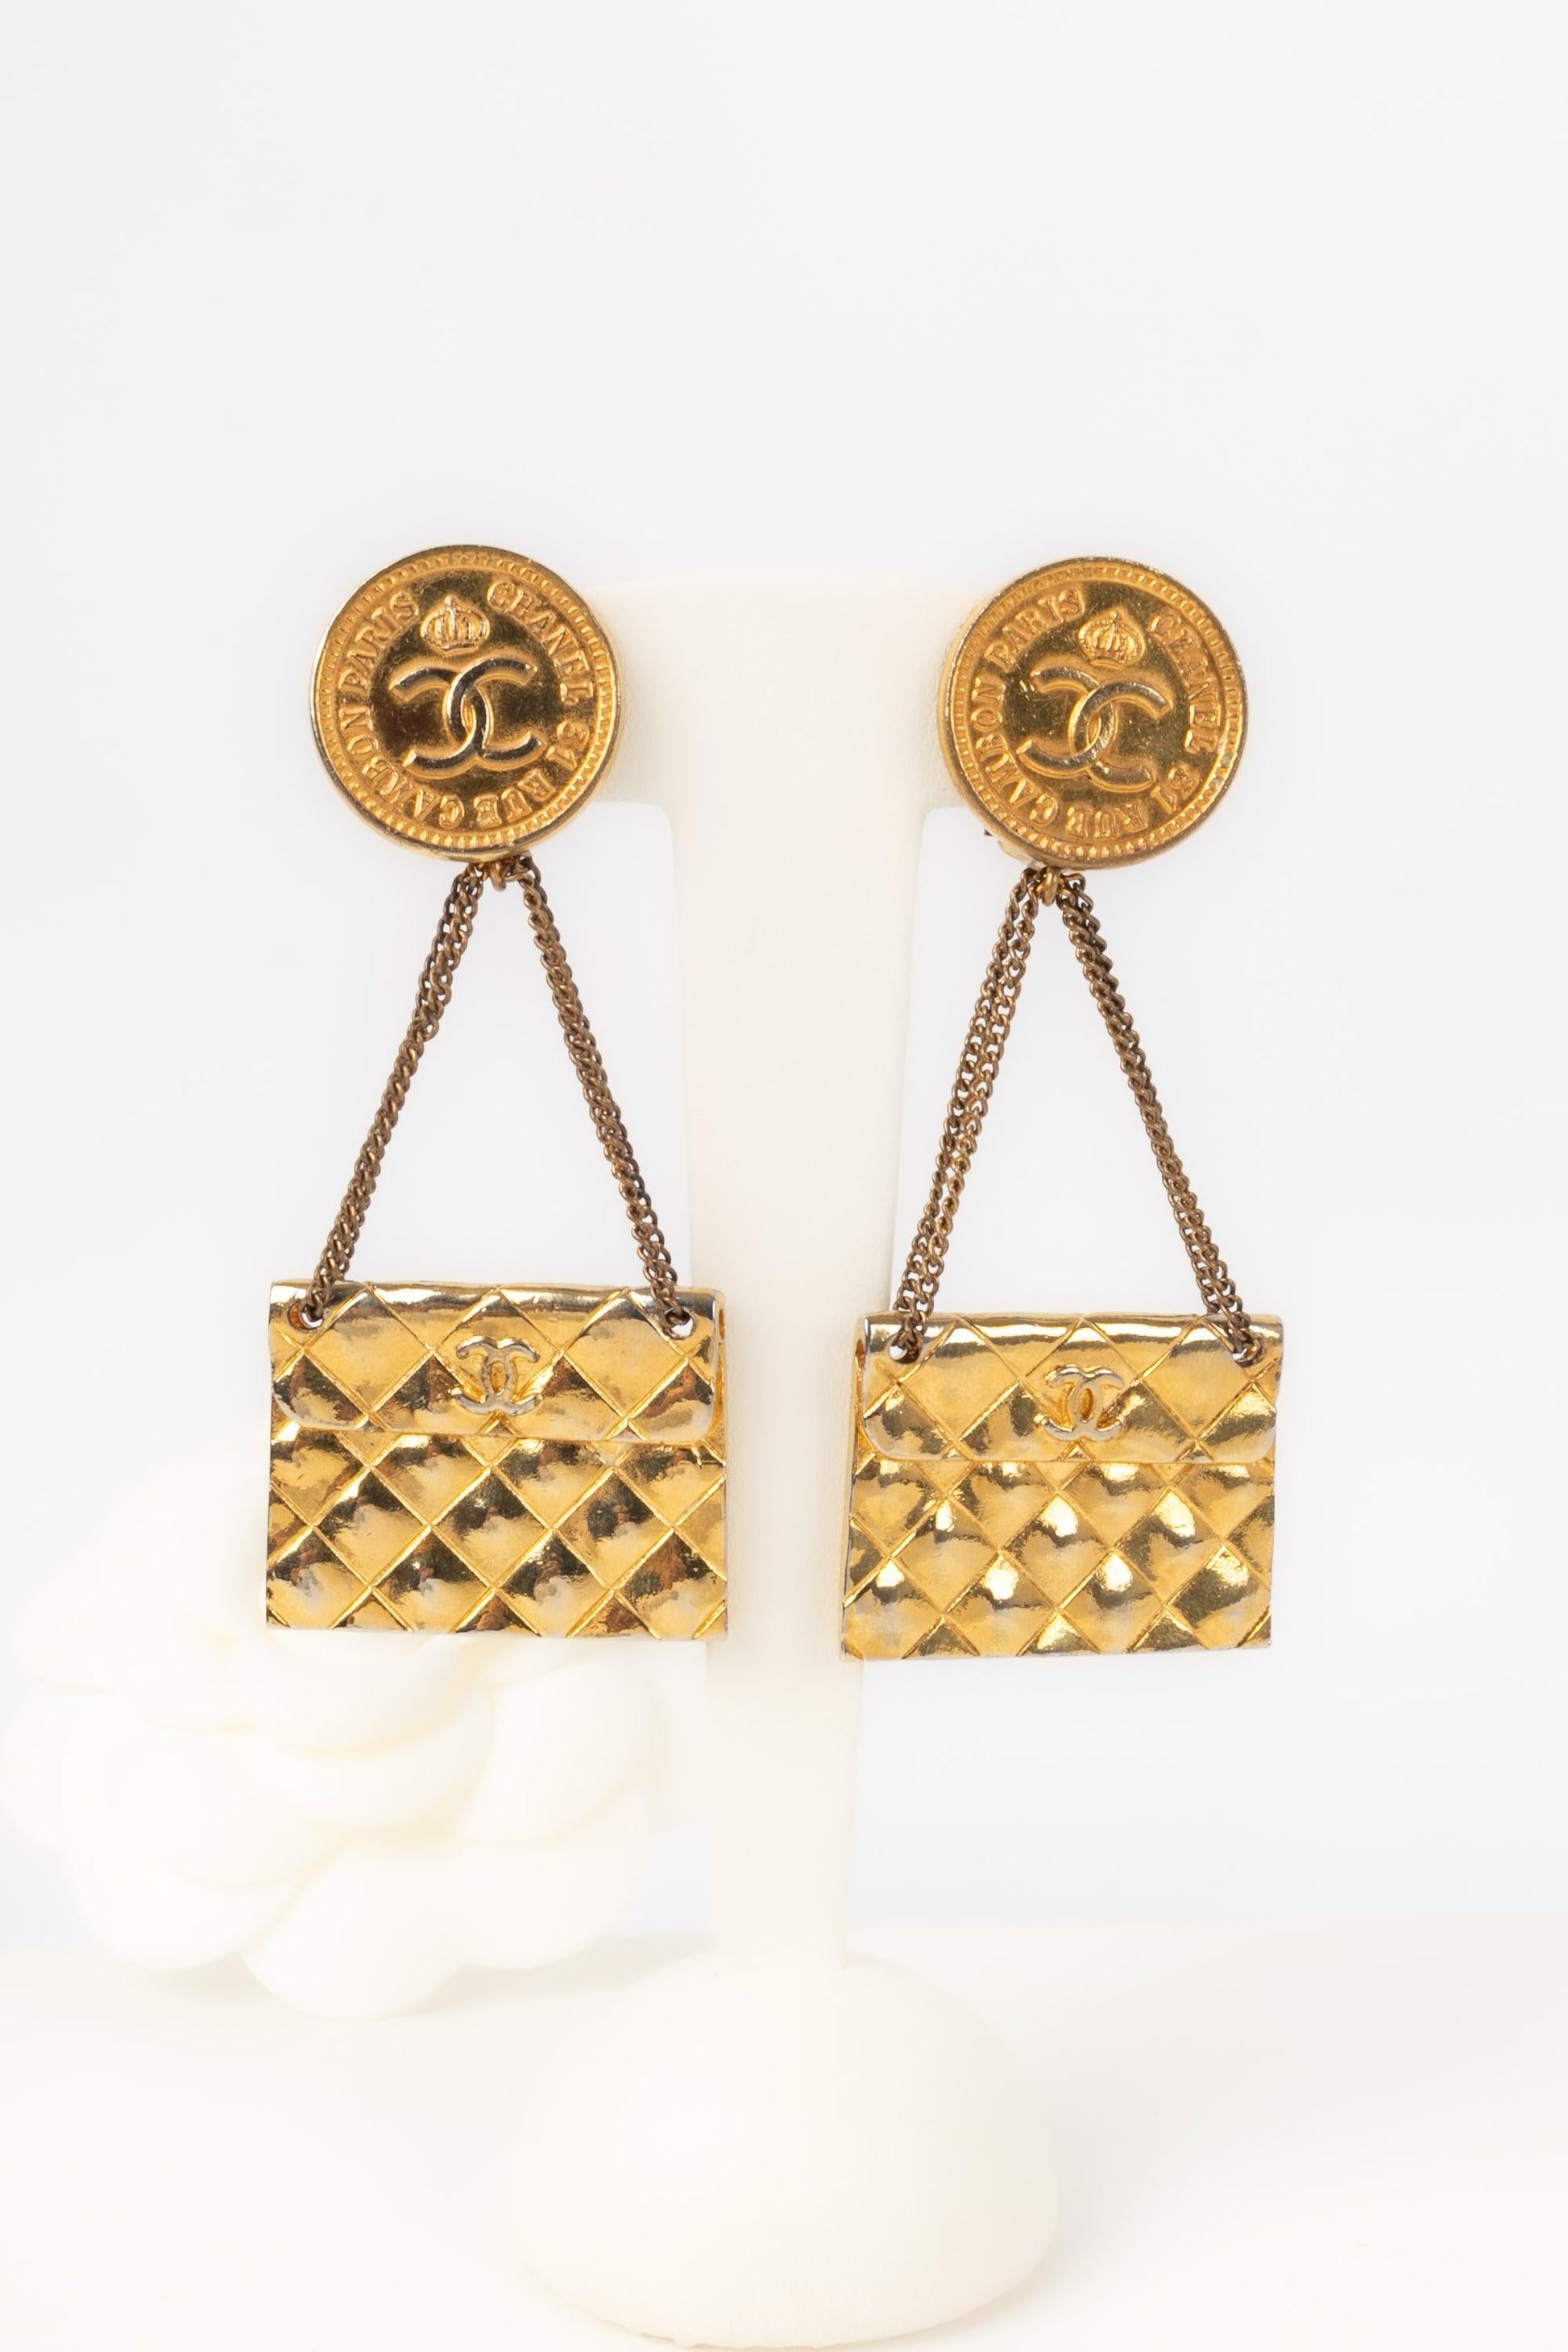 Chanel - Golden metal earrings.

Additional information:
Condition: Good condition
Dimensions: Length: 8 cm

Seller Reference: BOB167